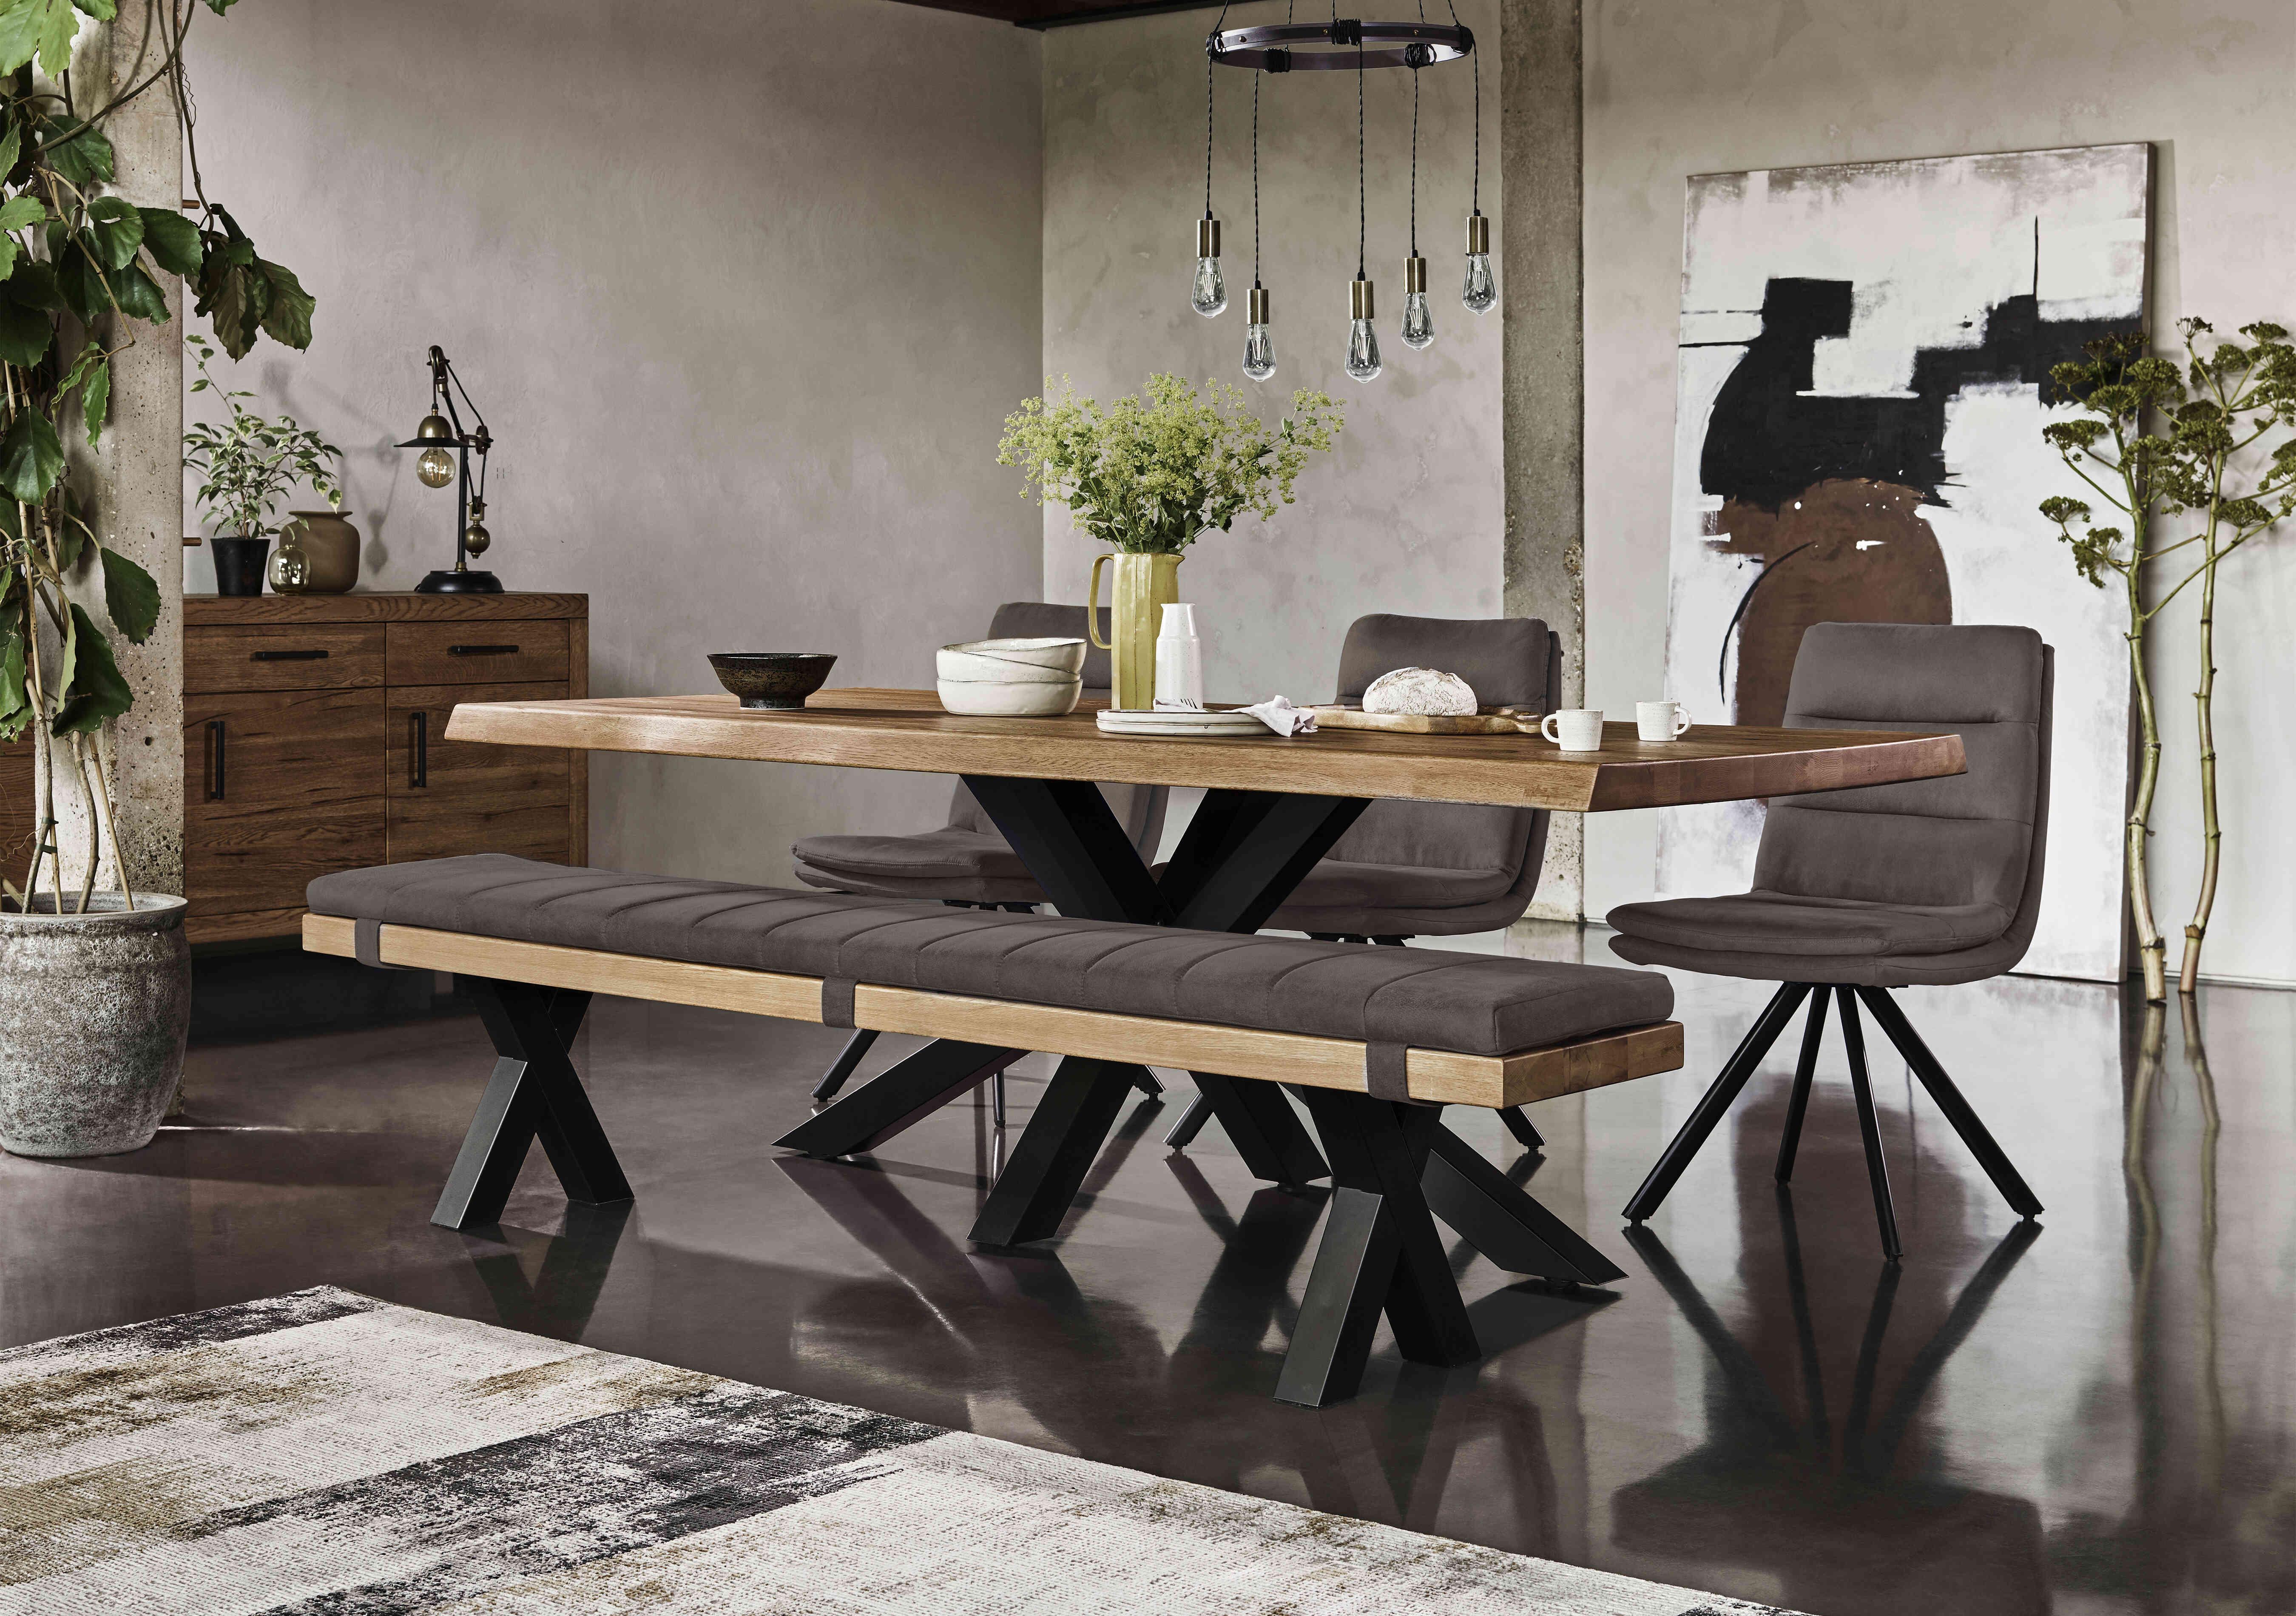 Njord Raw Edge Dining Table with Metal Star Base, Dining Bench and 3 Dining Chairs in  on Furniture Village